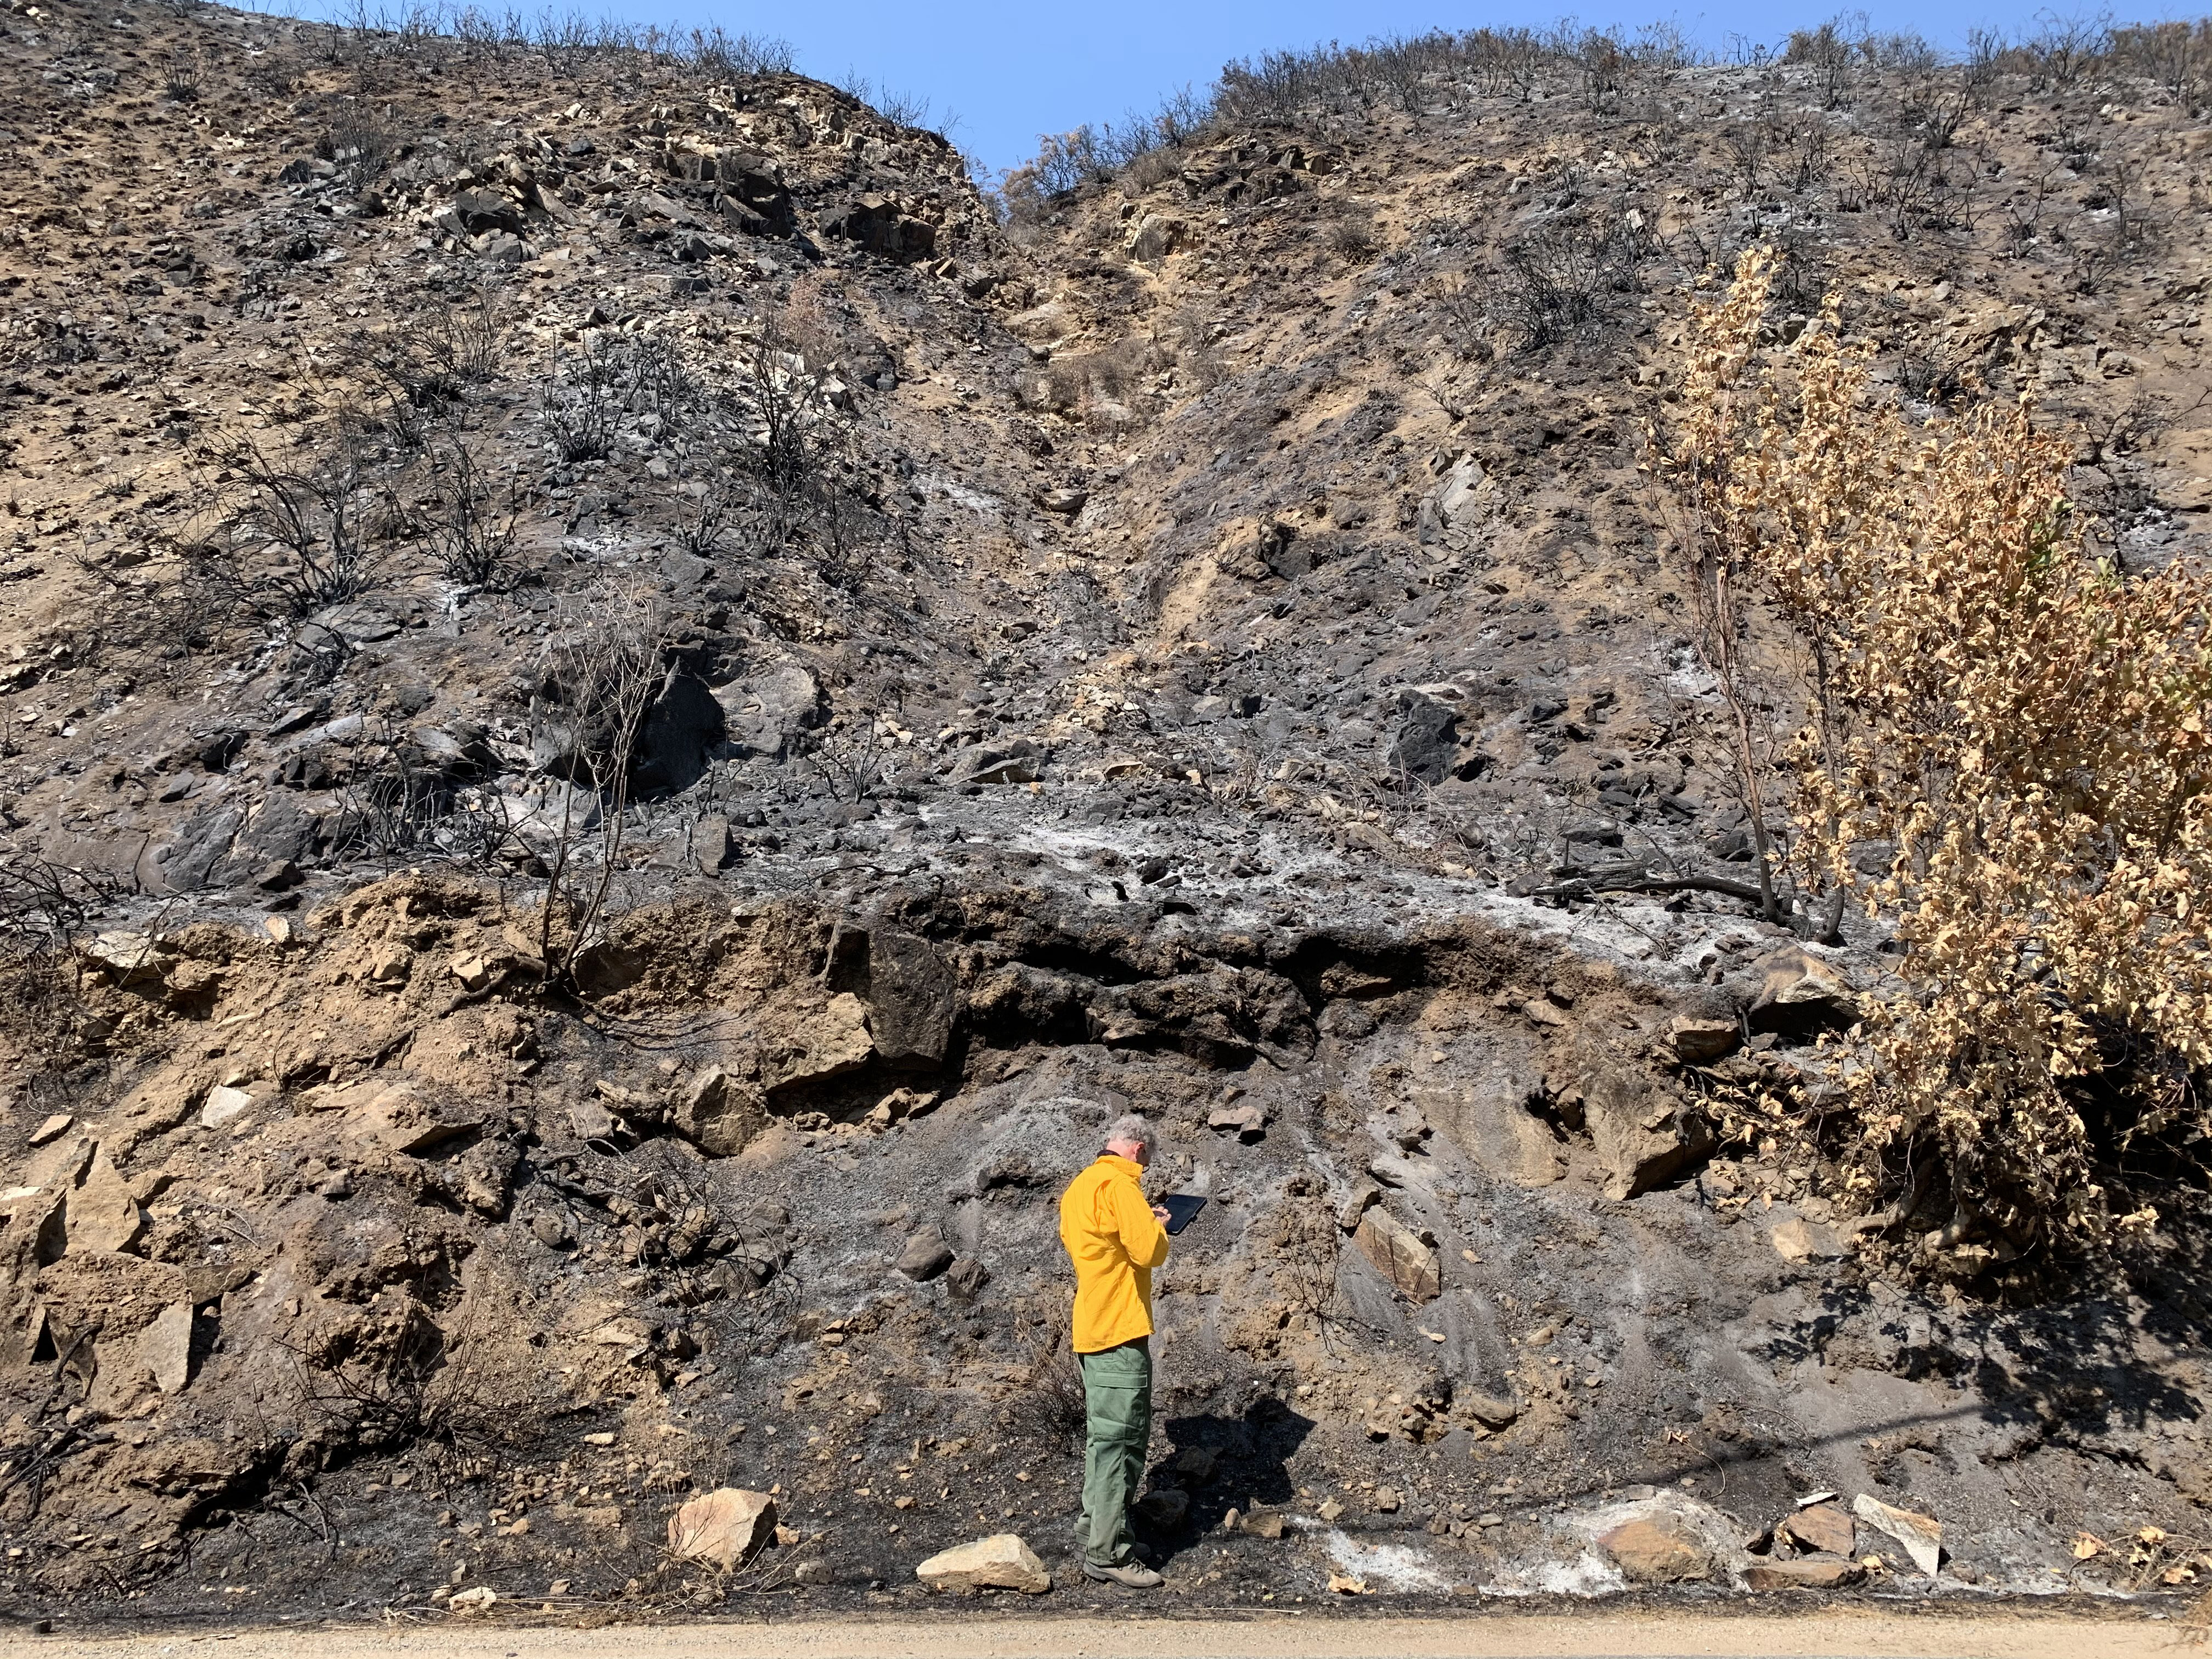 An individual taking notes at the base of a burned slope.